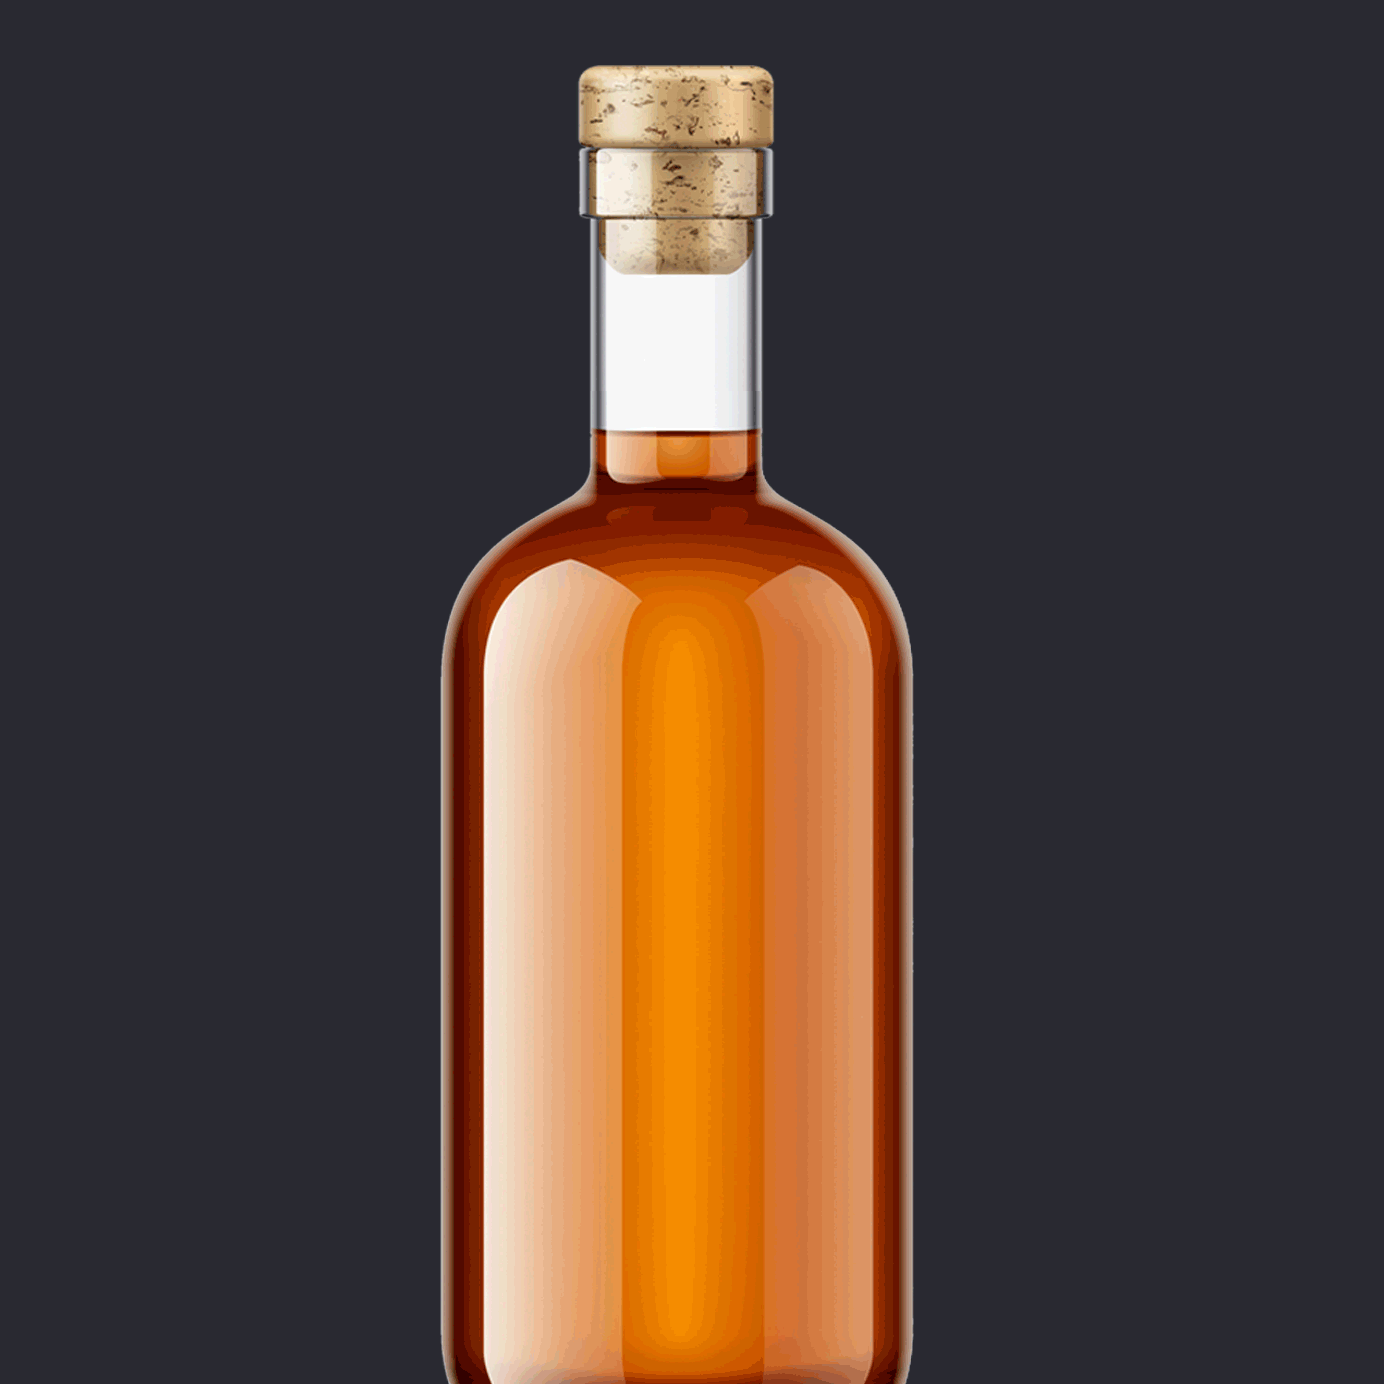 The Key to a 30-Year-Old Old Fashioned? Dehydrated Whiskey